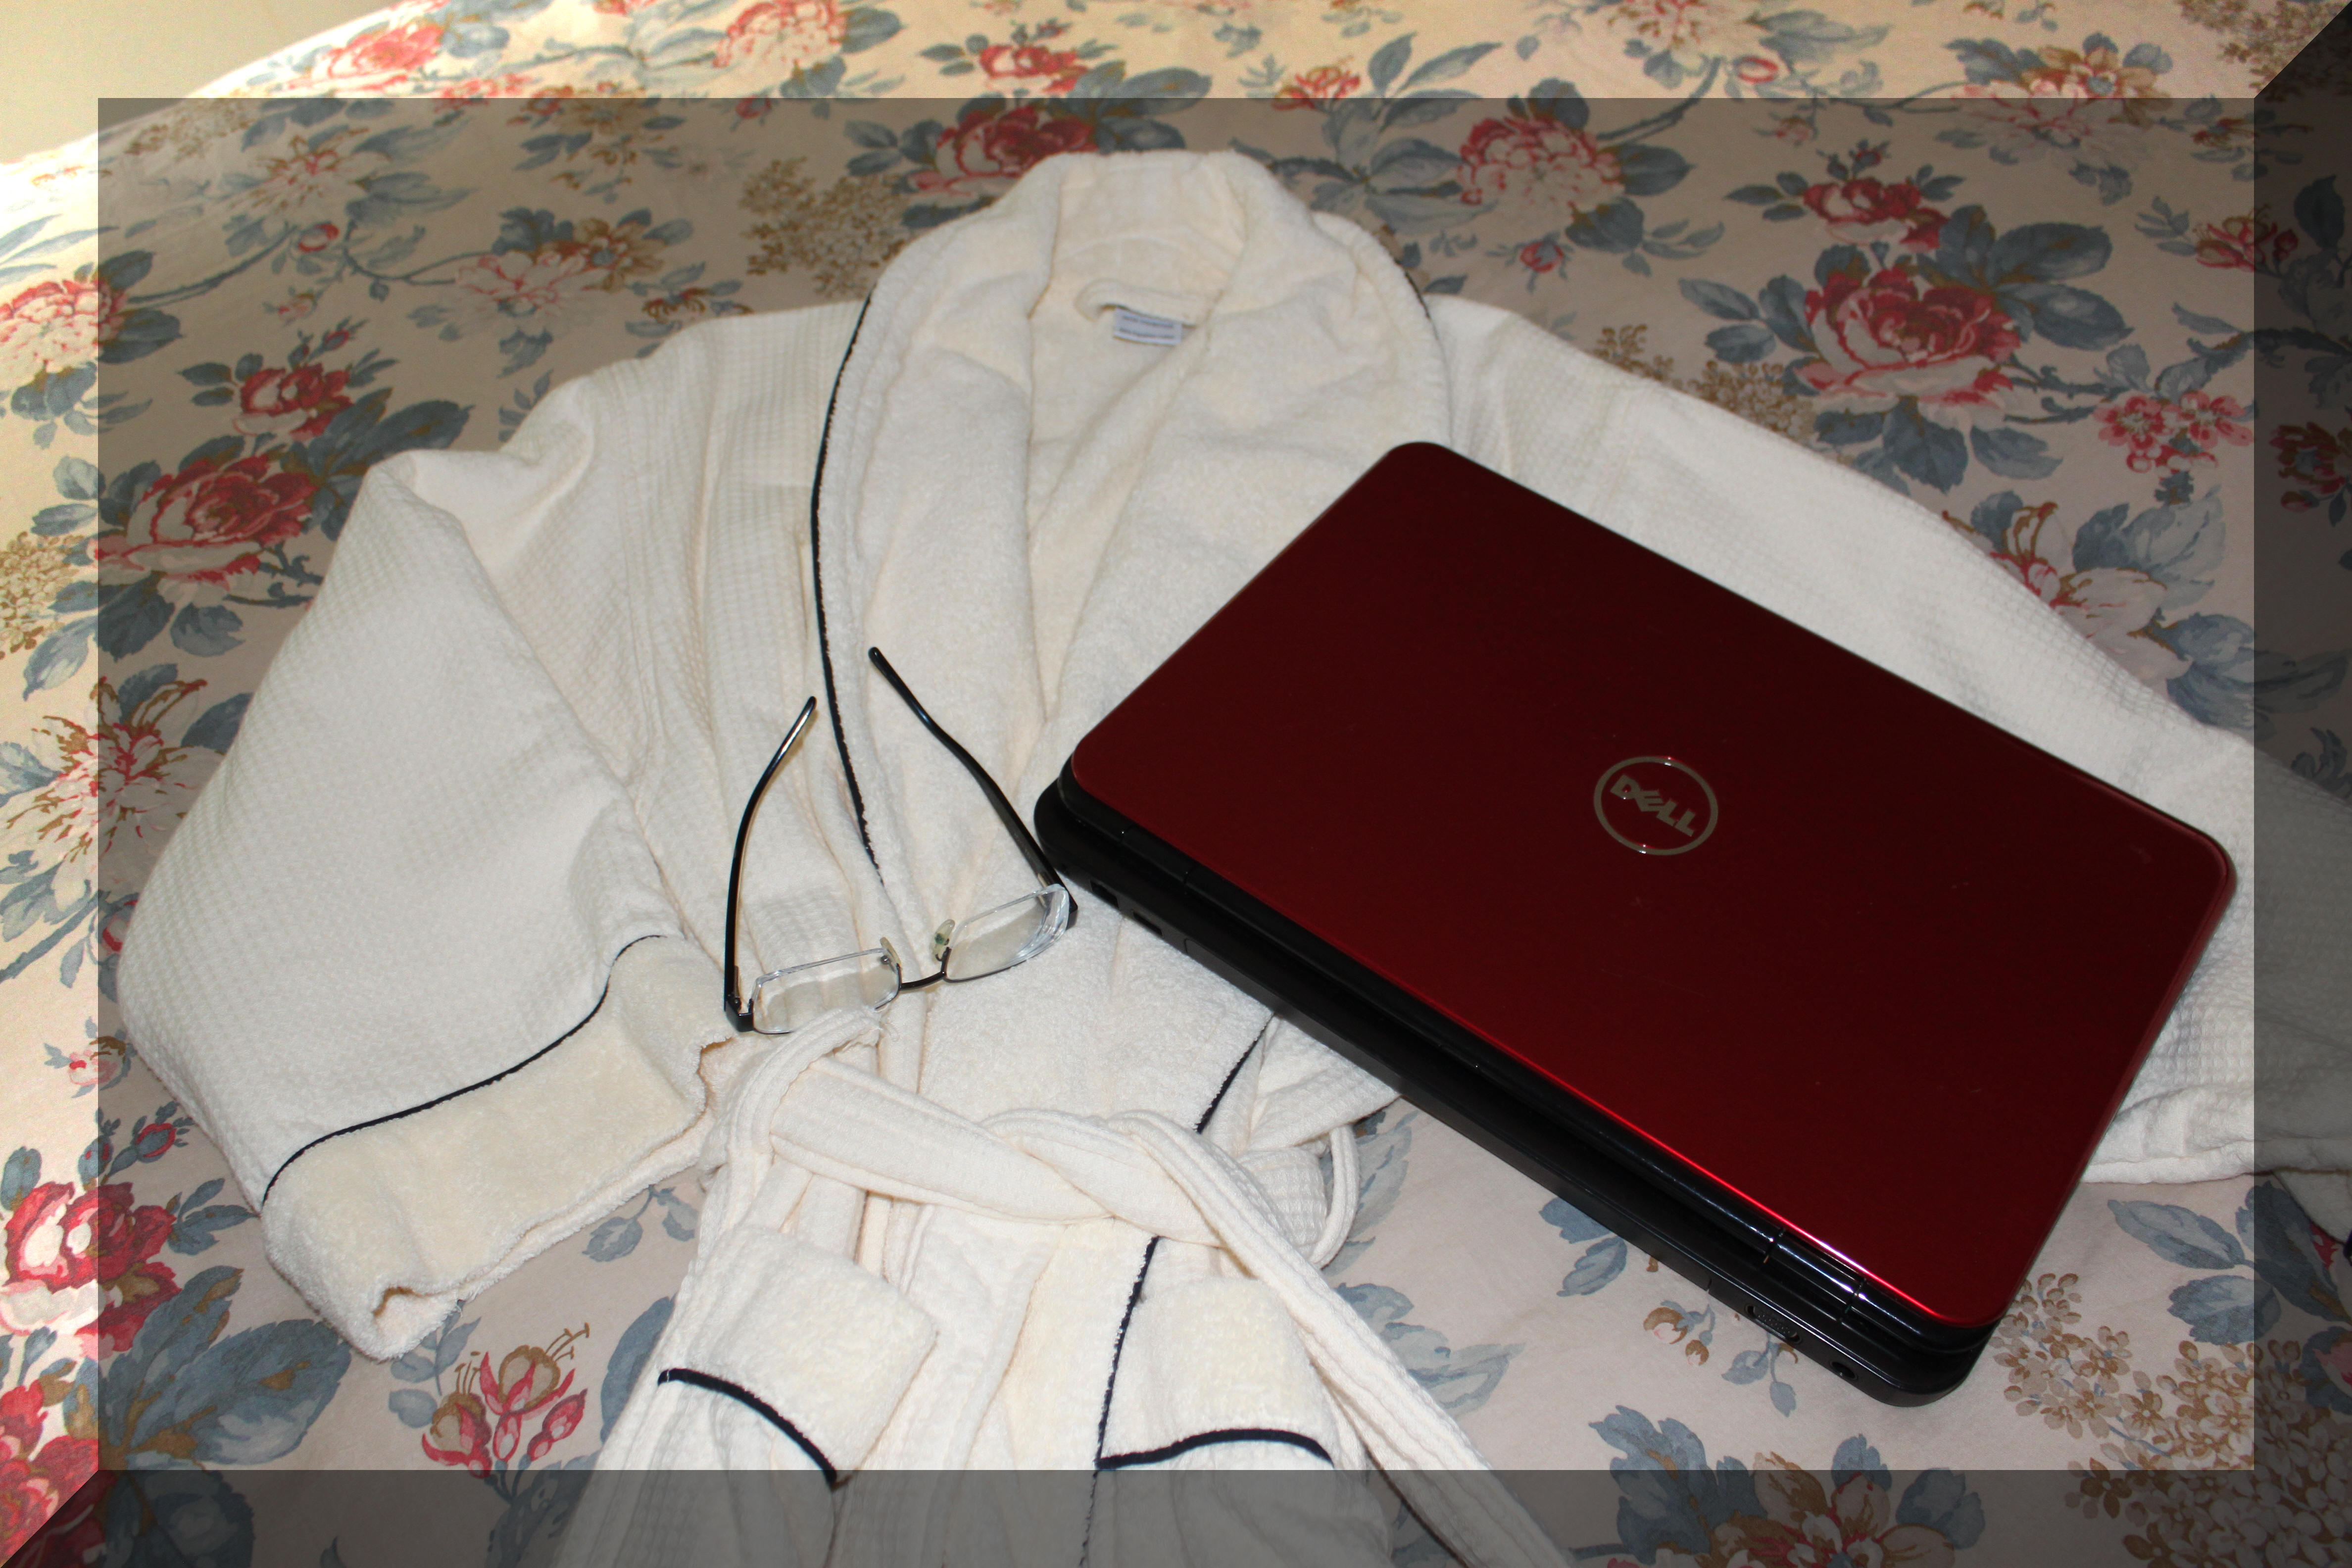 Robe and Laptop